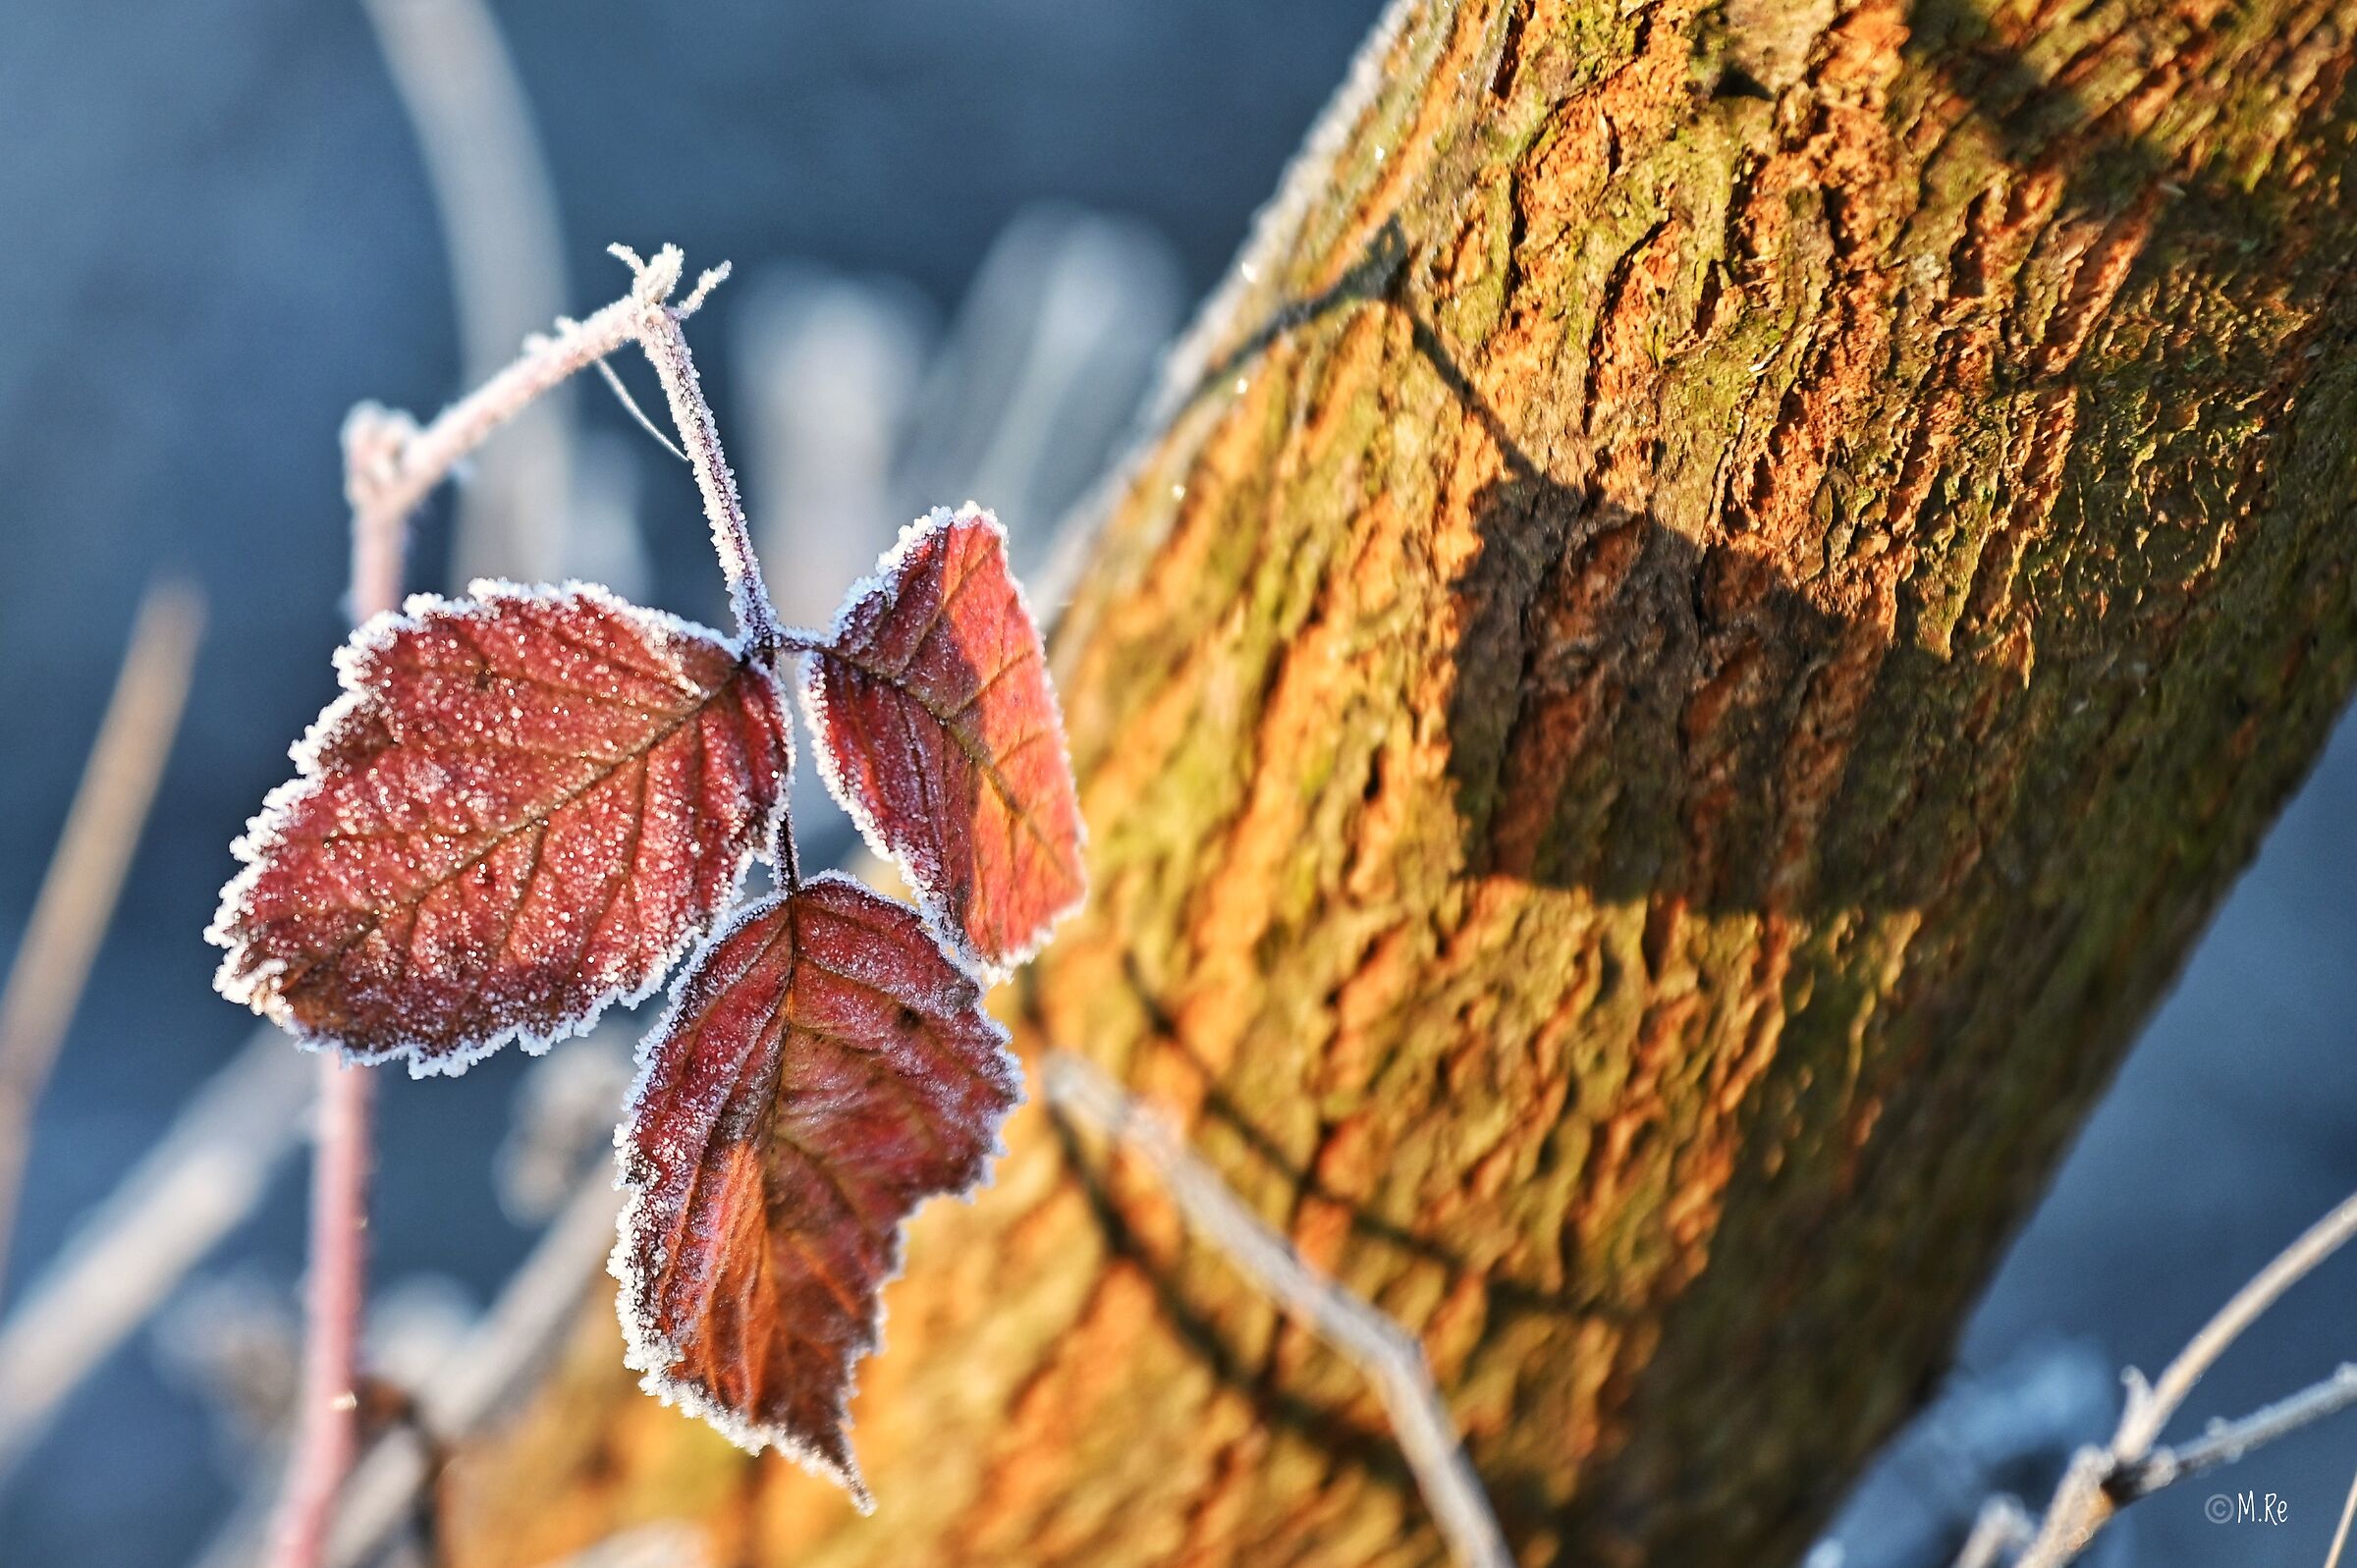 The frost and warm colors...